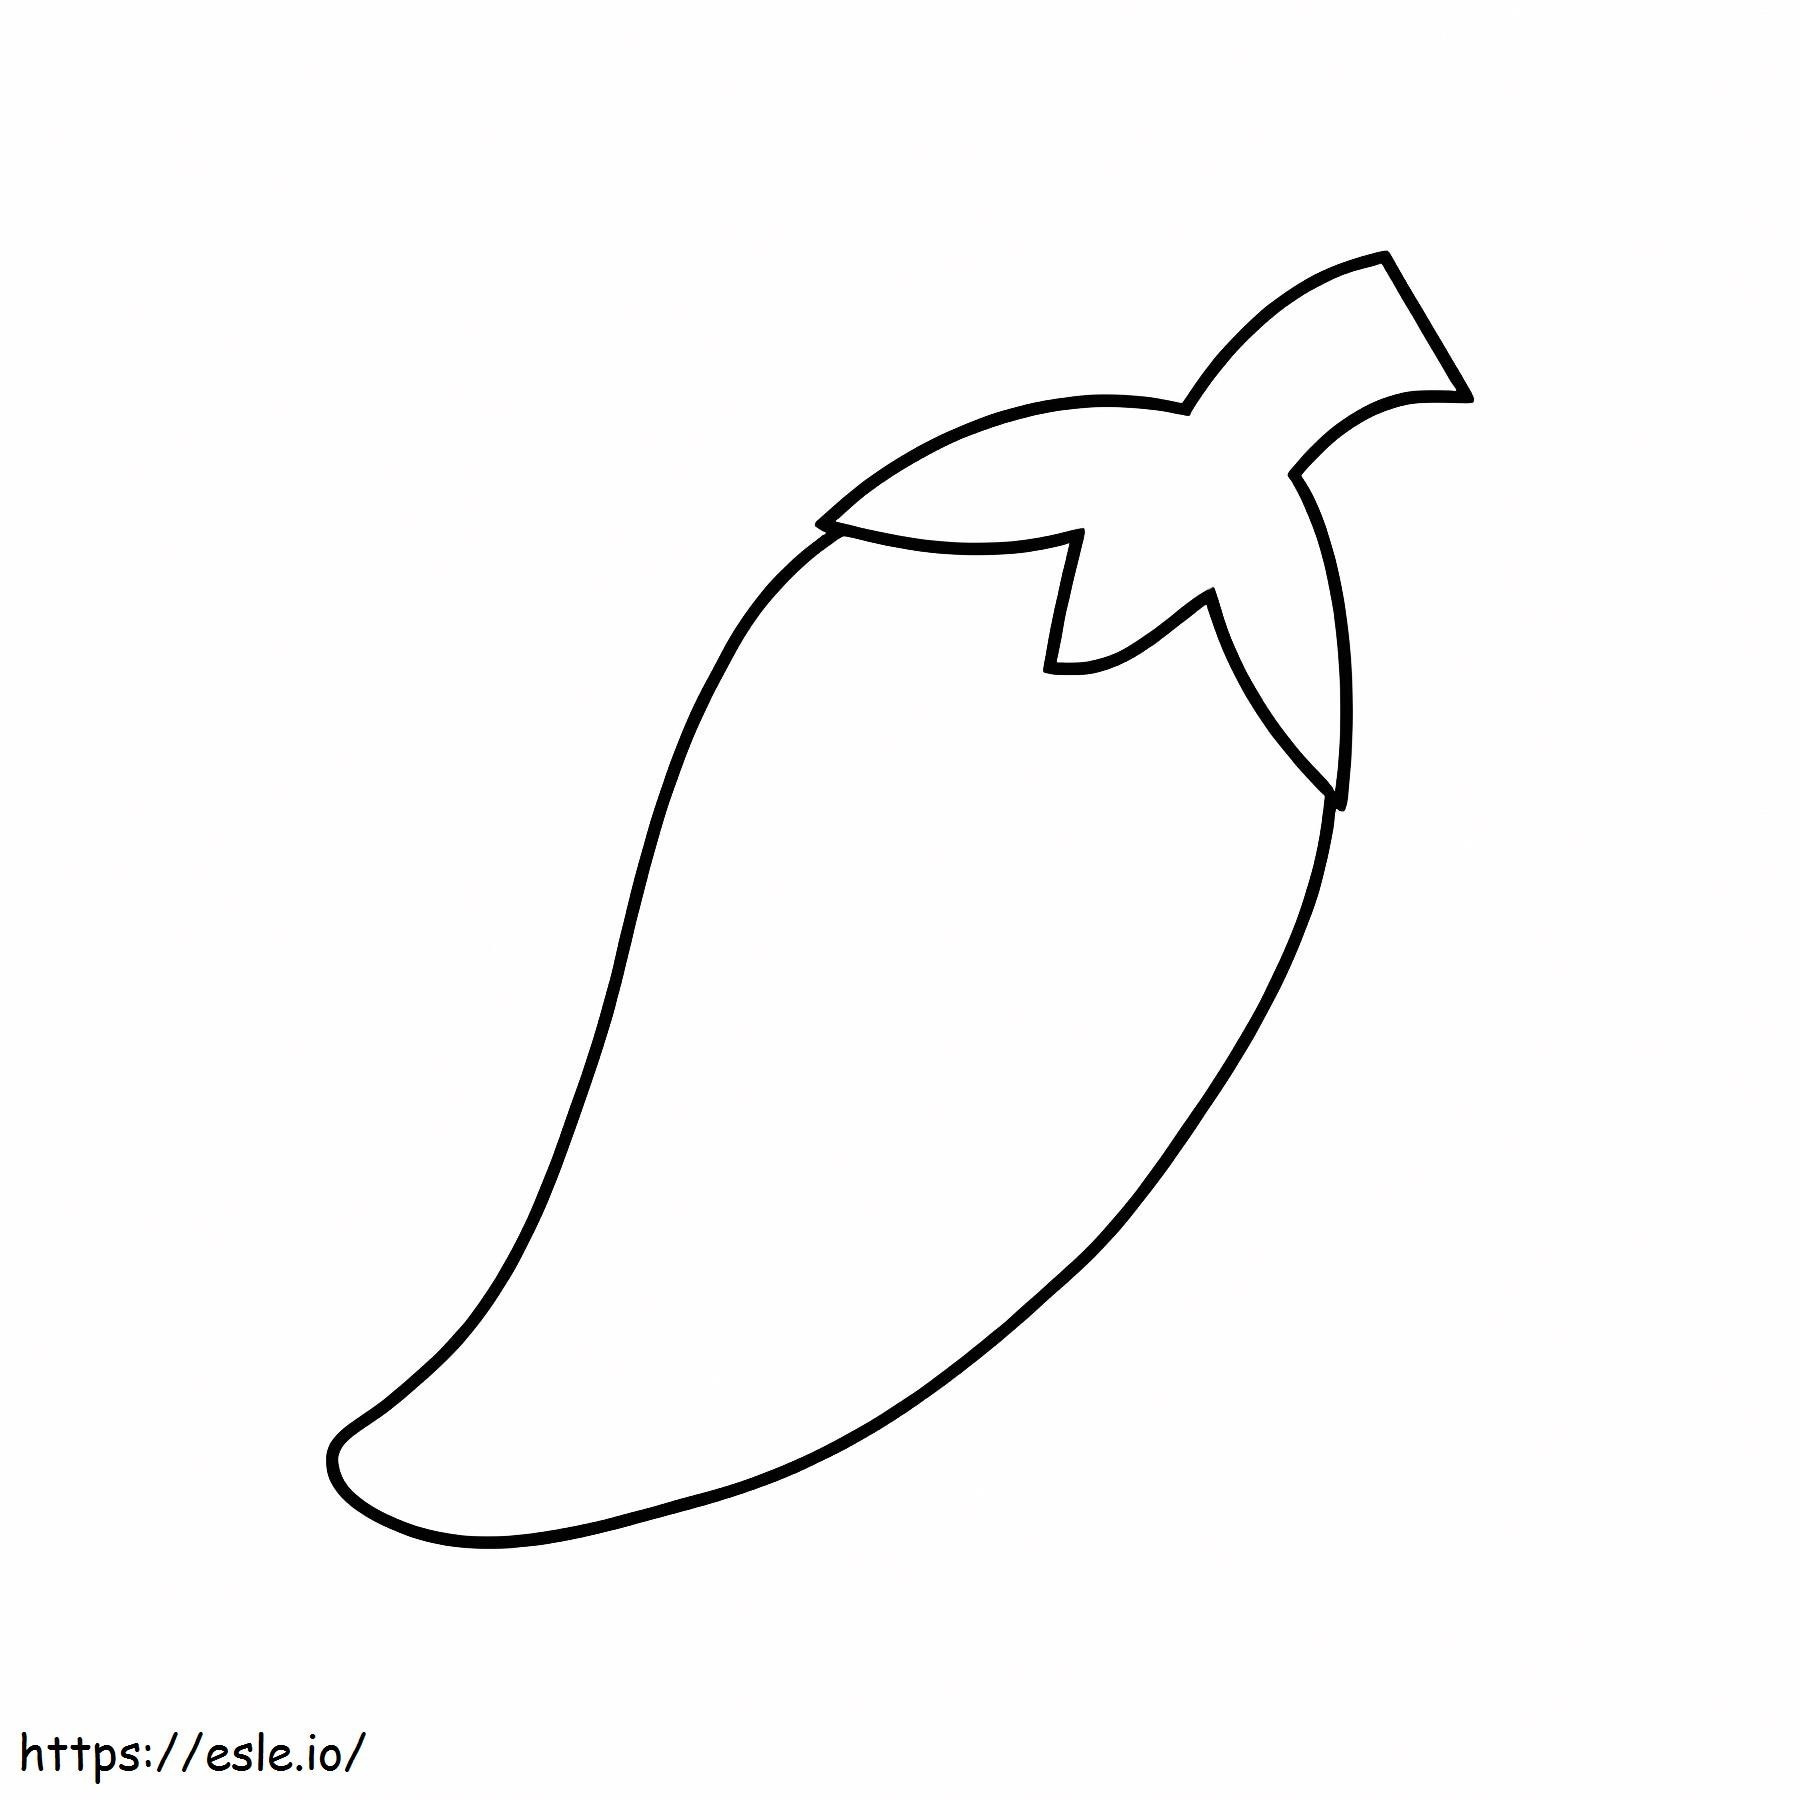 Perfect Chili Pepper coloring page